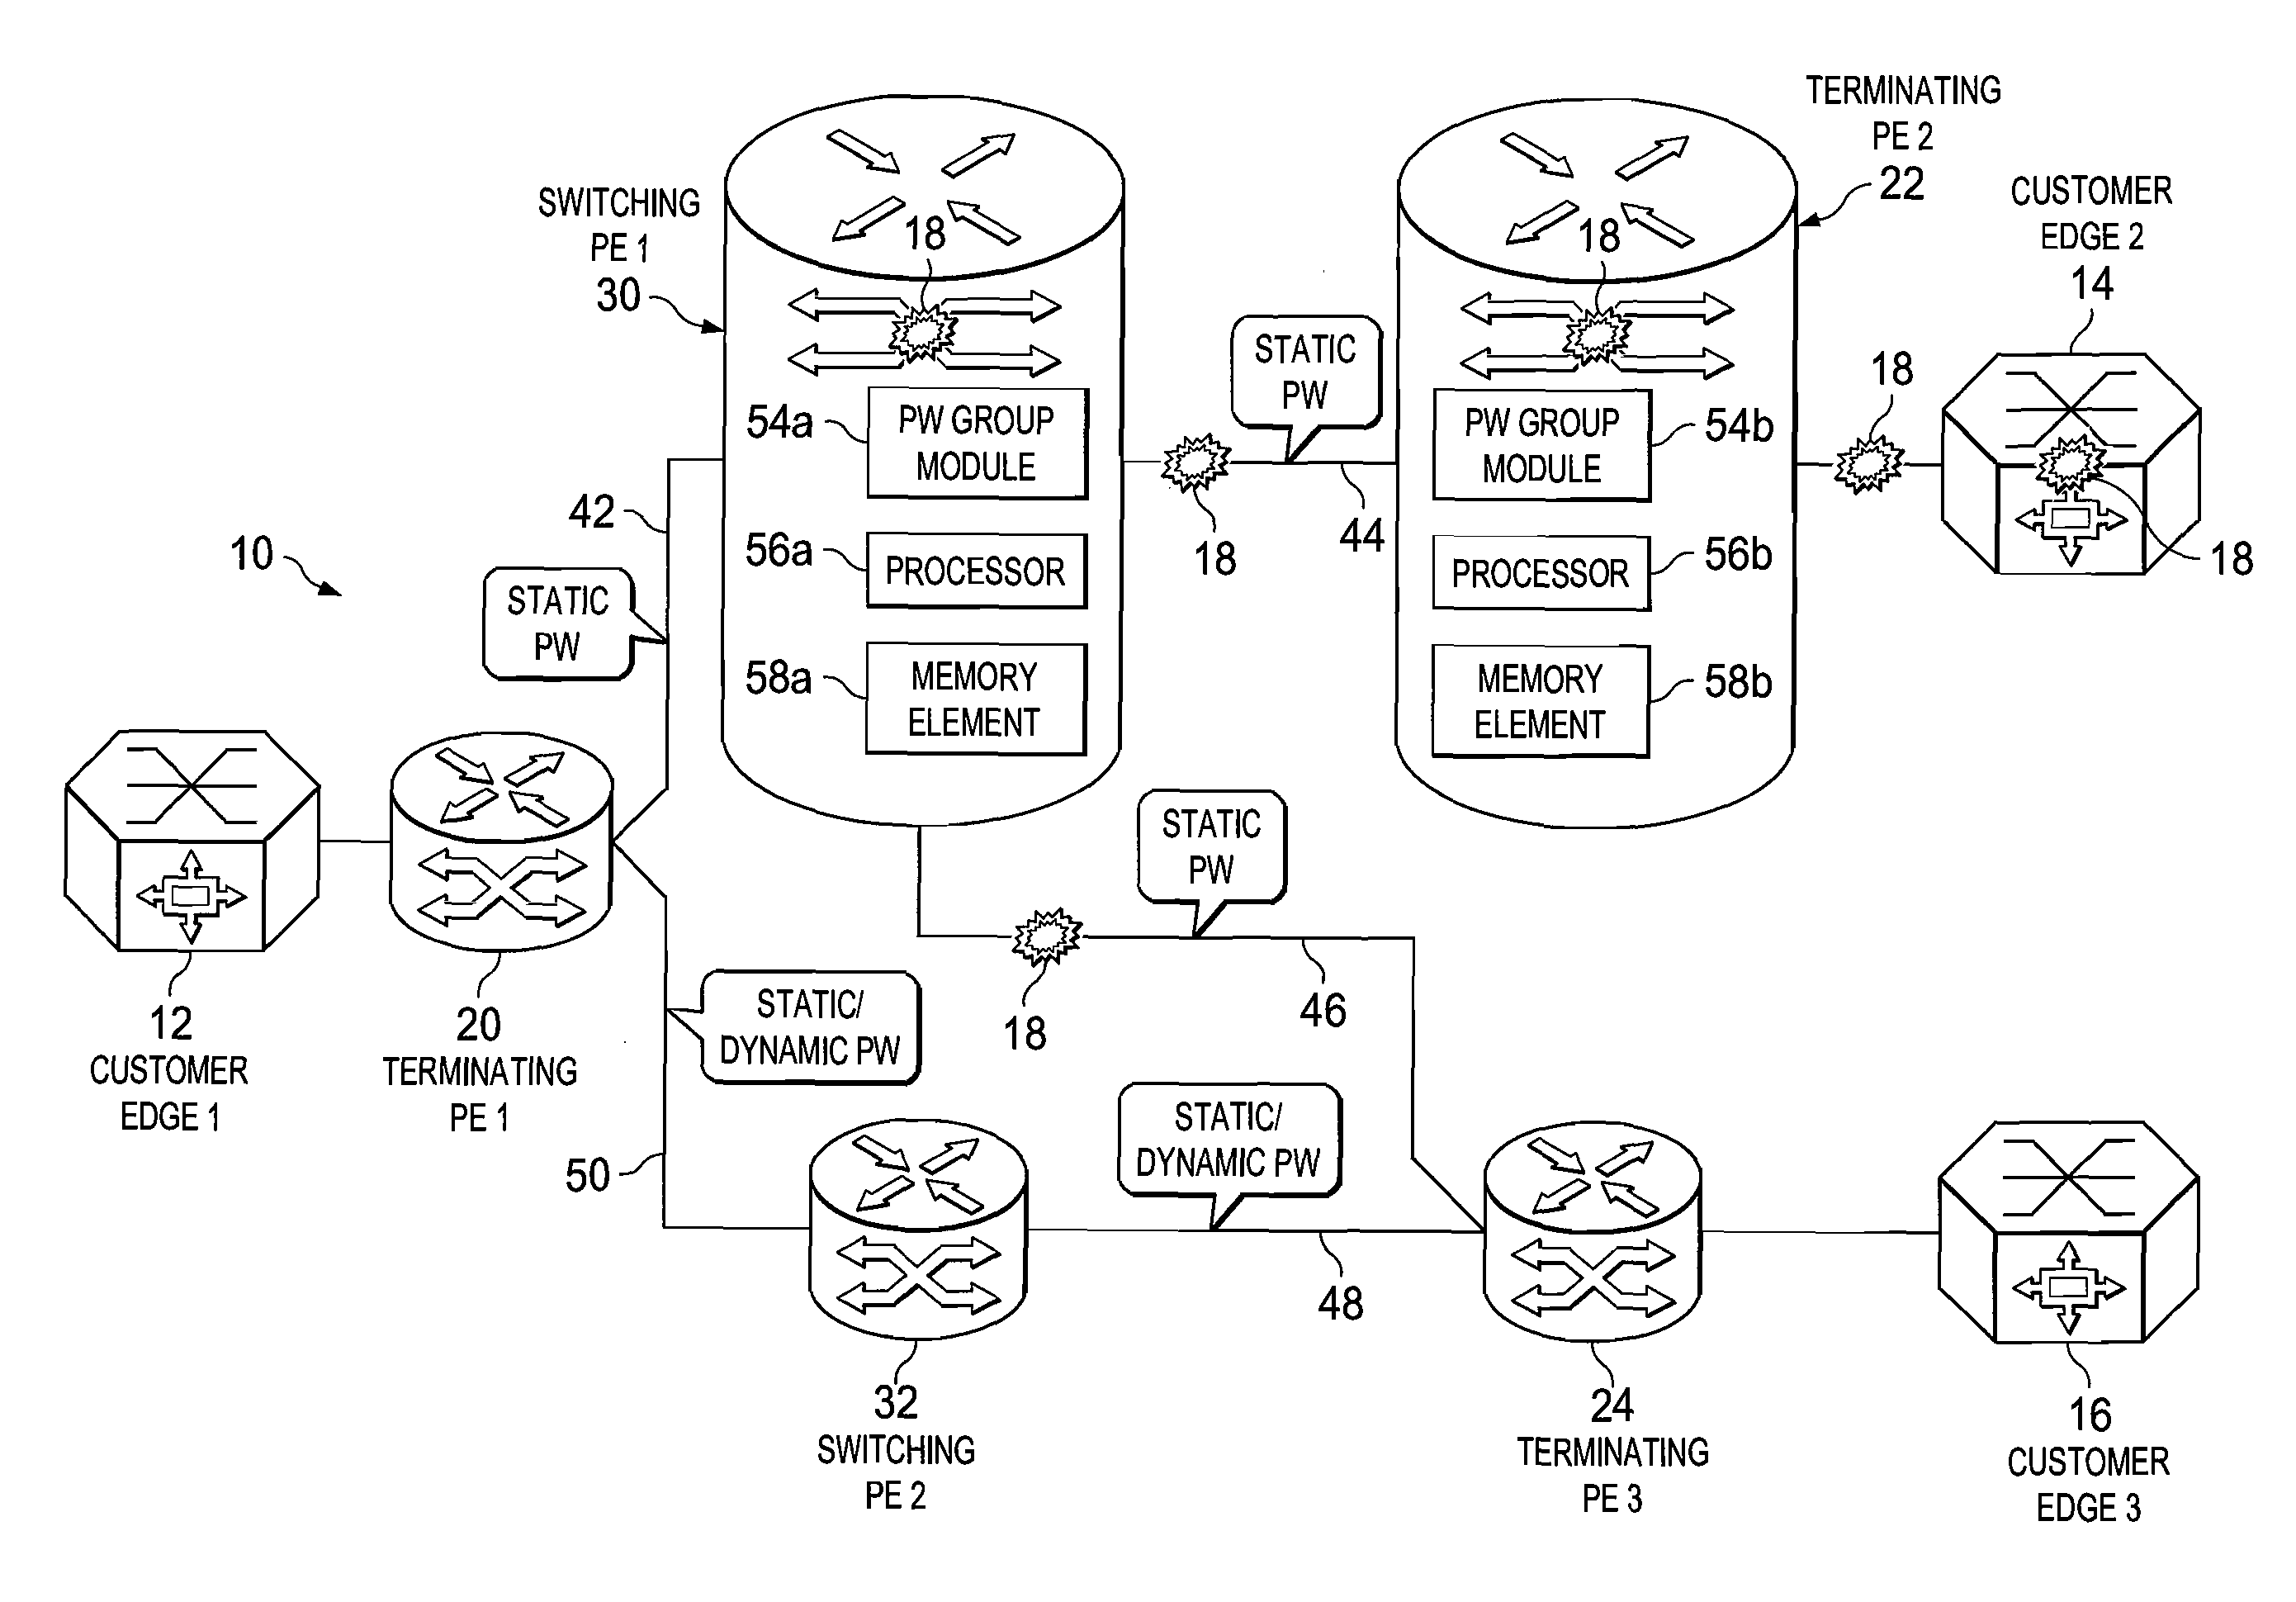 System and method for providing pseudowire group labels in a network environment